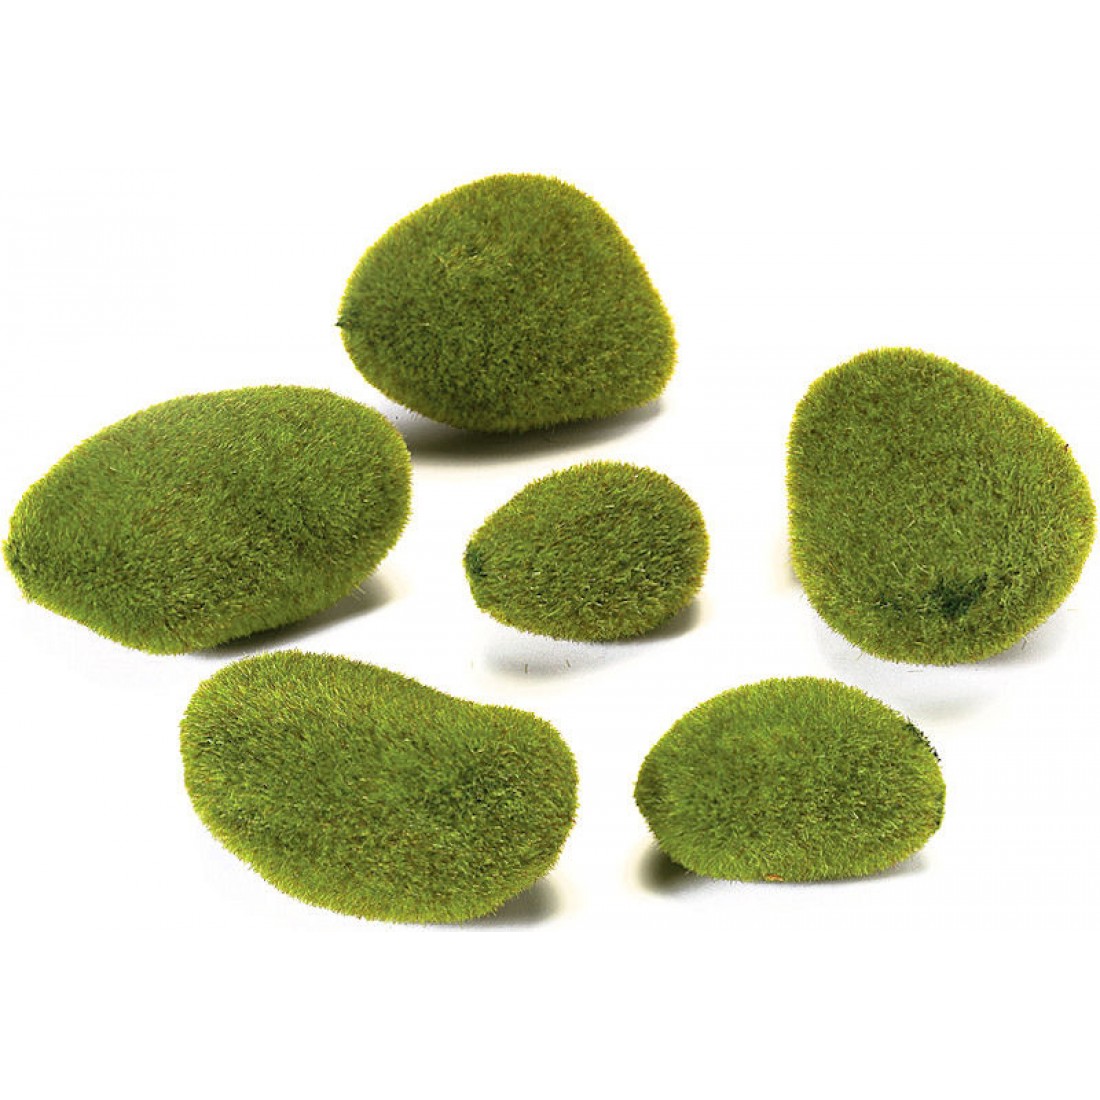 Moss on Rocks (Assorted) - Stone Moss - Assorted Sizes Moss Stones